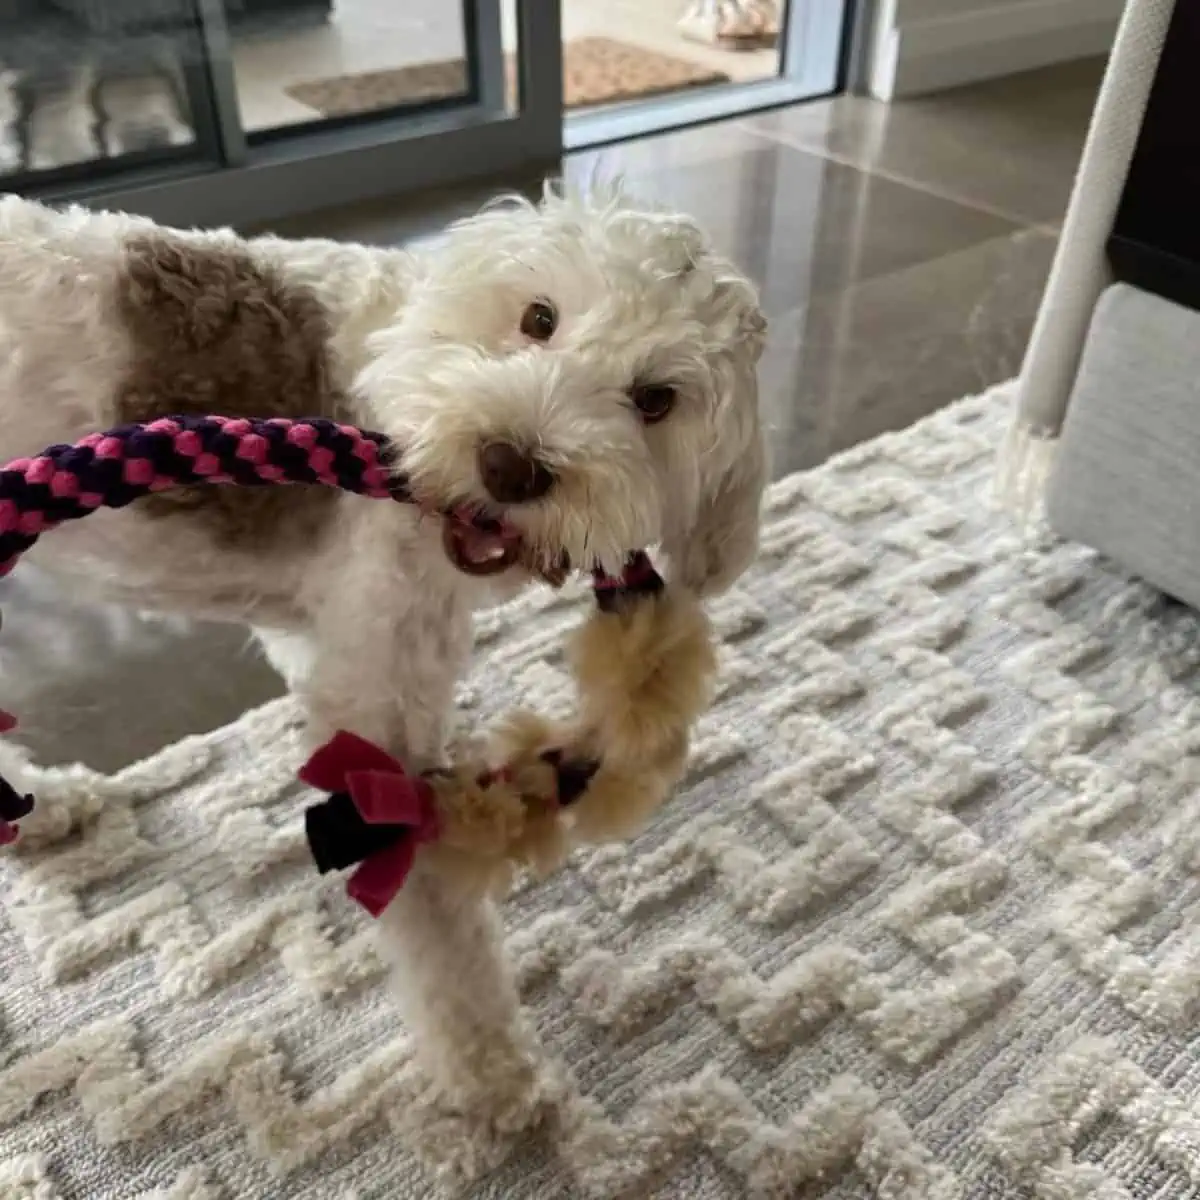 Labradoodle plays rope toy